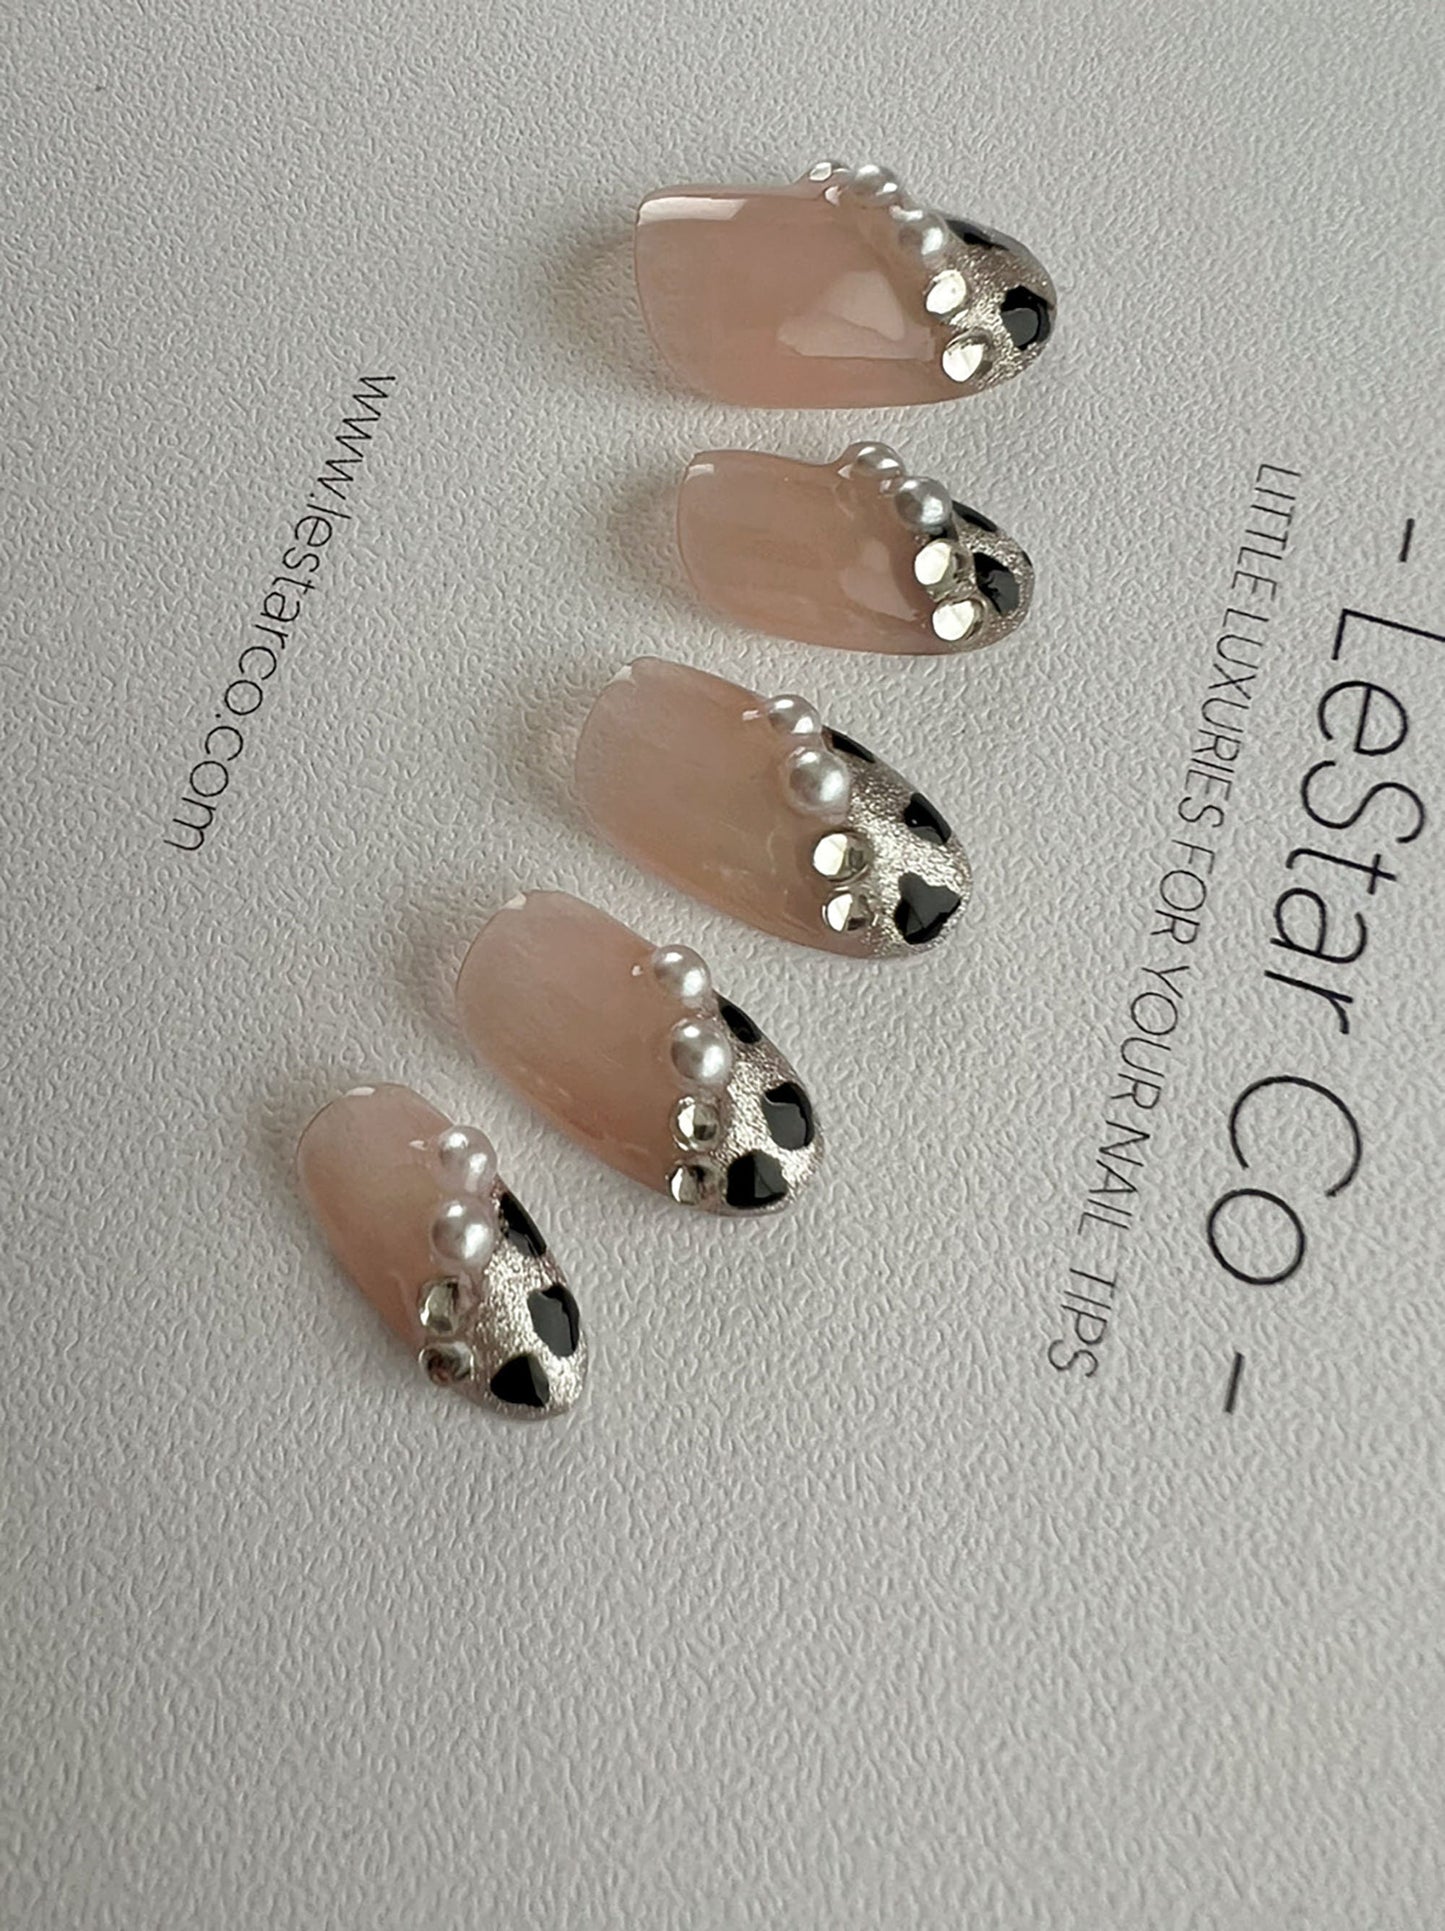 Reusable Leopard and Pearl | Premium Press on Nails Gel | Fake Nails | Cute Fun Colorful Colorful Gel Nail Artist faux nails xx221